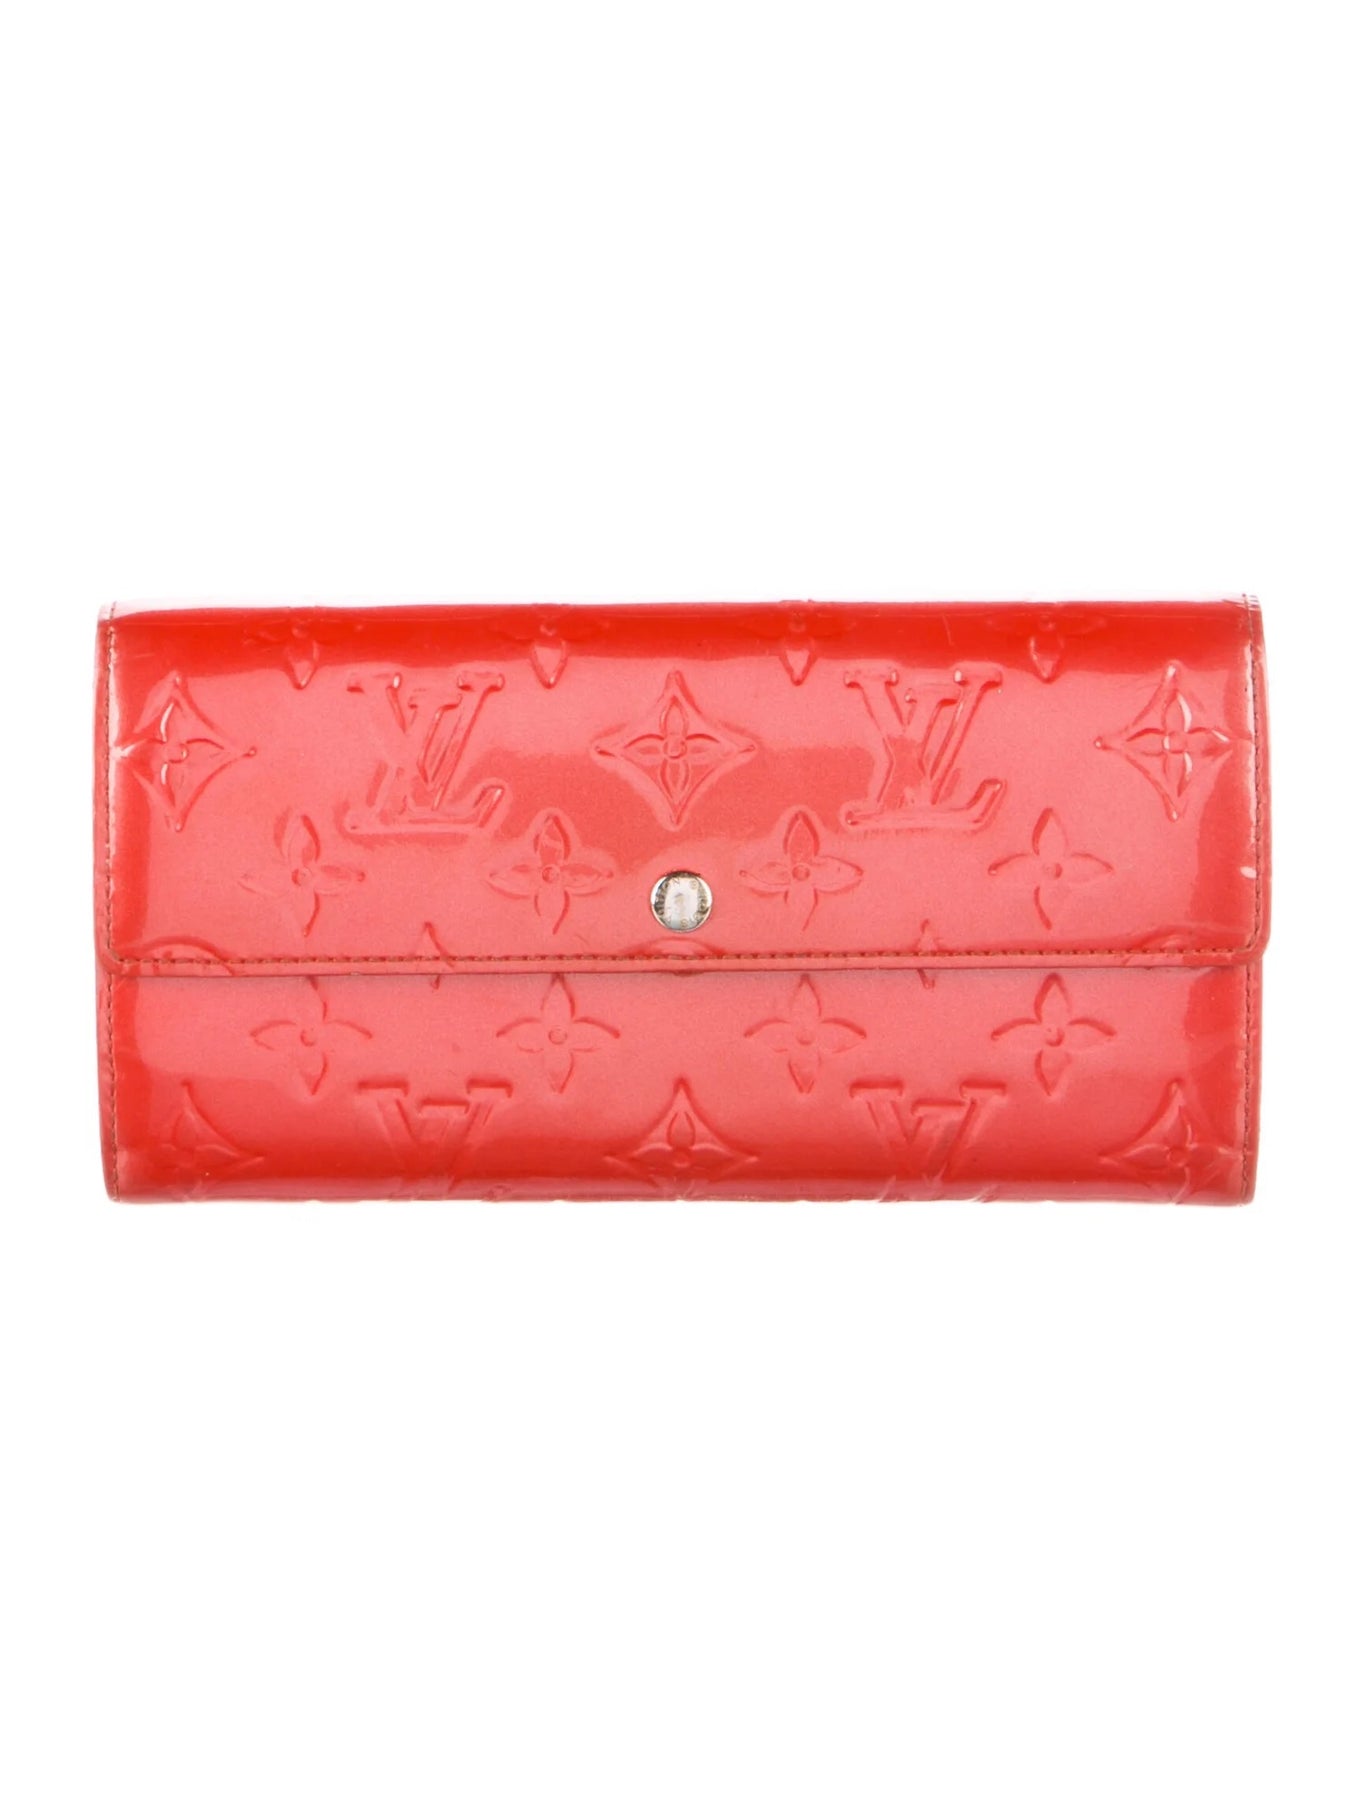 Louis Vuitton - Authenticated Sarah Wallet - Patent Leather Red for Women, Good Condition